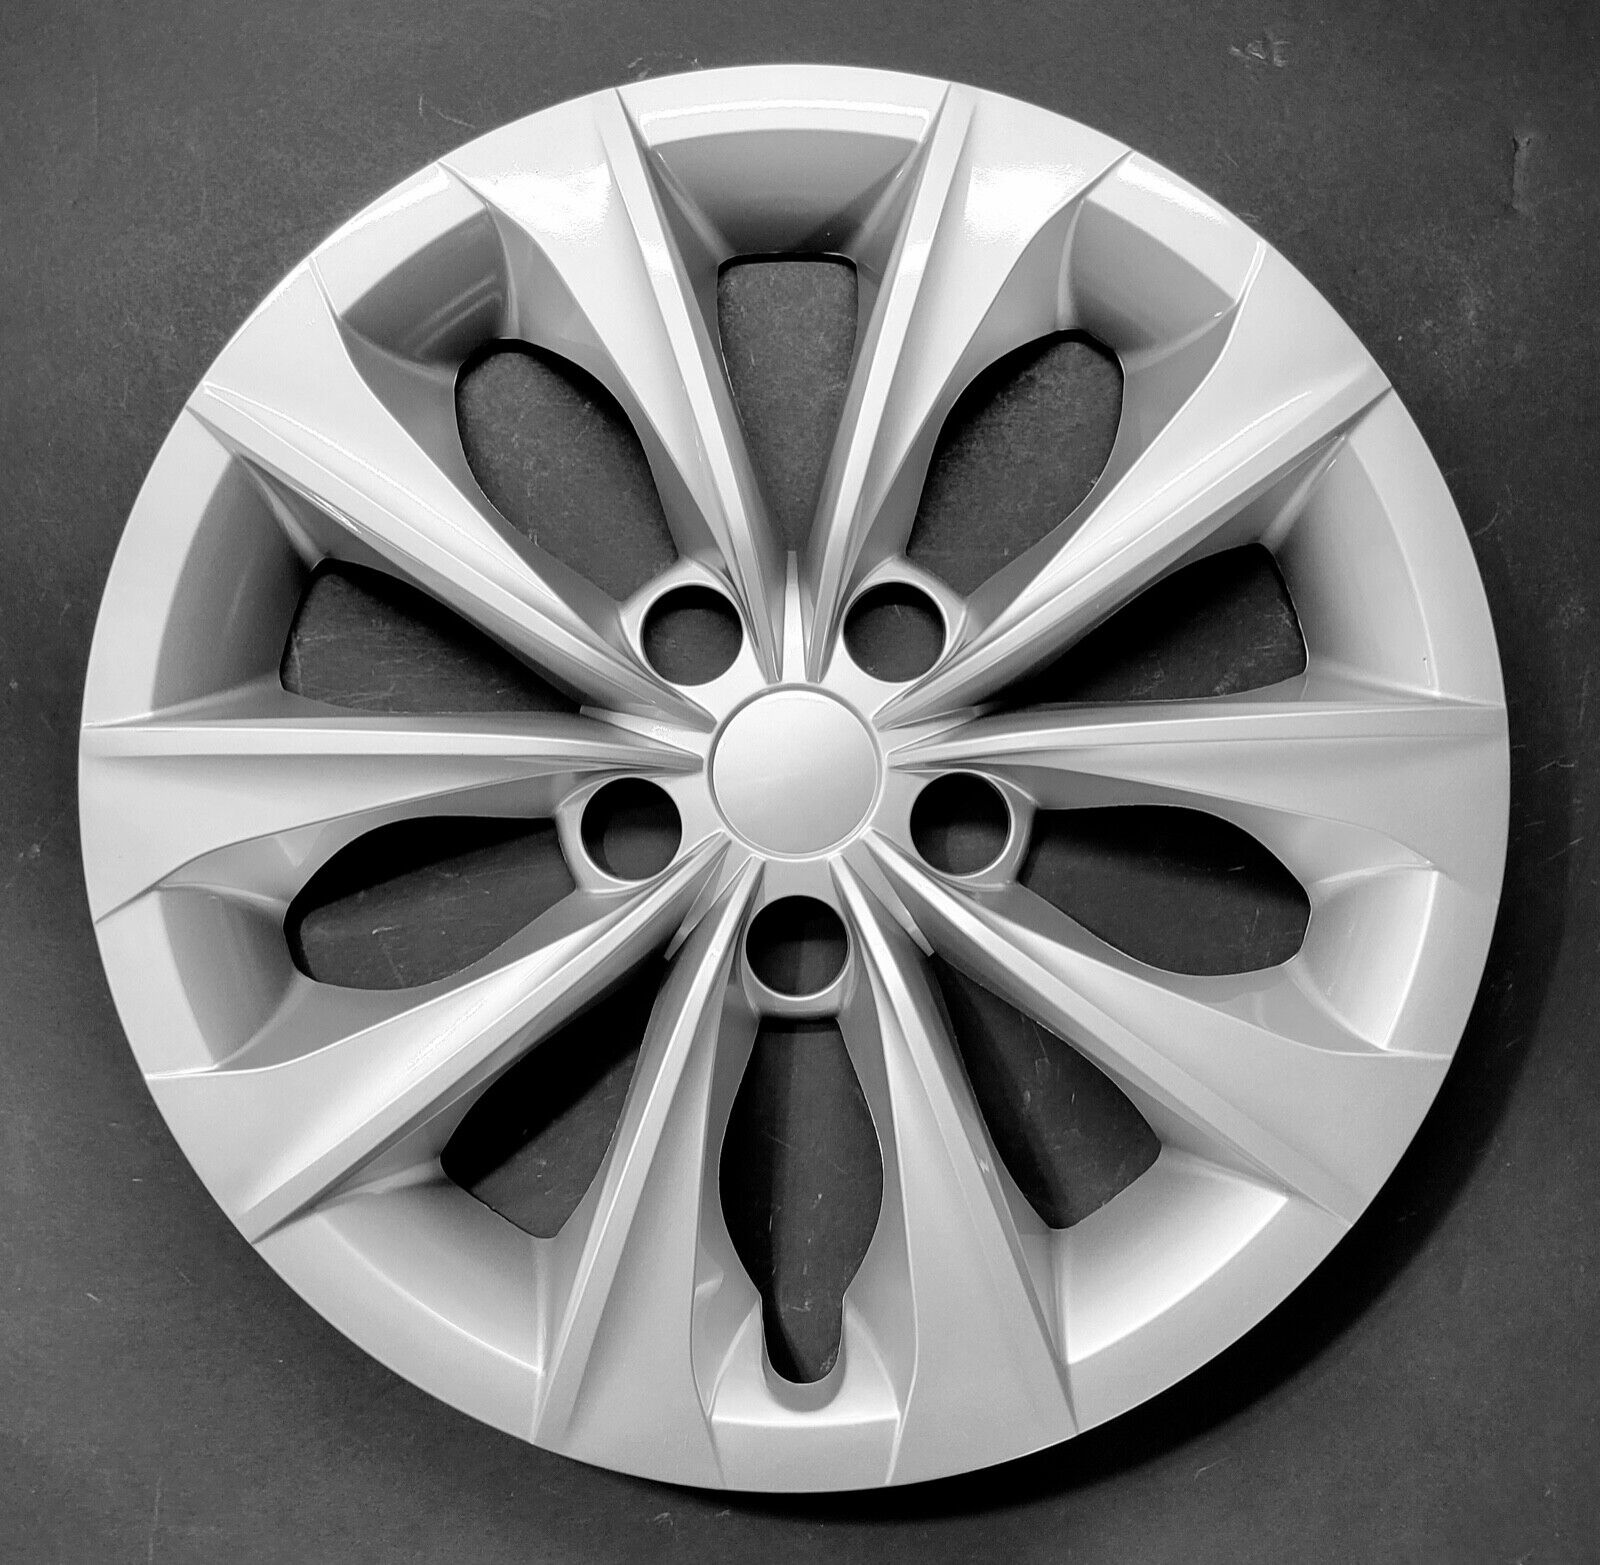 One New Wheel Cover Hubcap Fits 2015-2017 Toyota Camry 16\